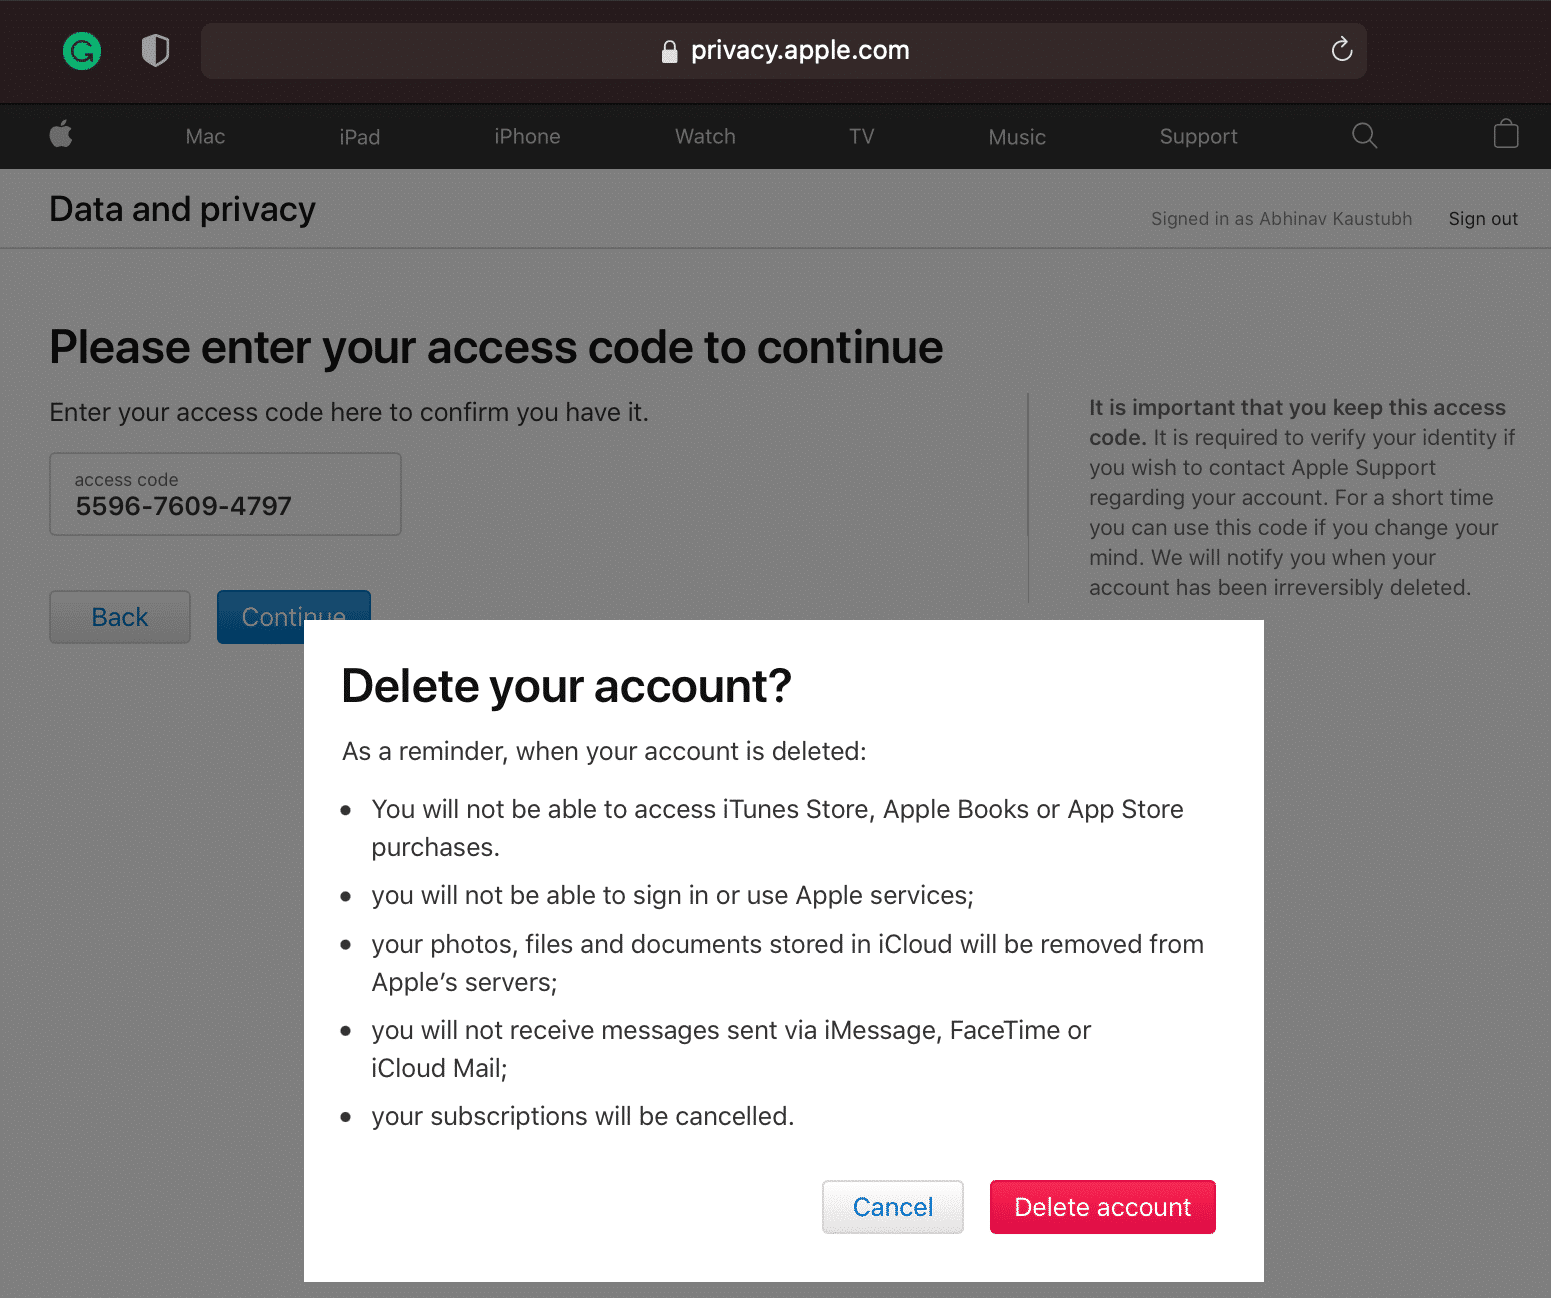 Click Delete account to delete your Apple ID account permanently.